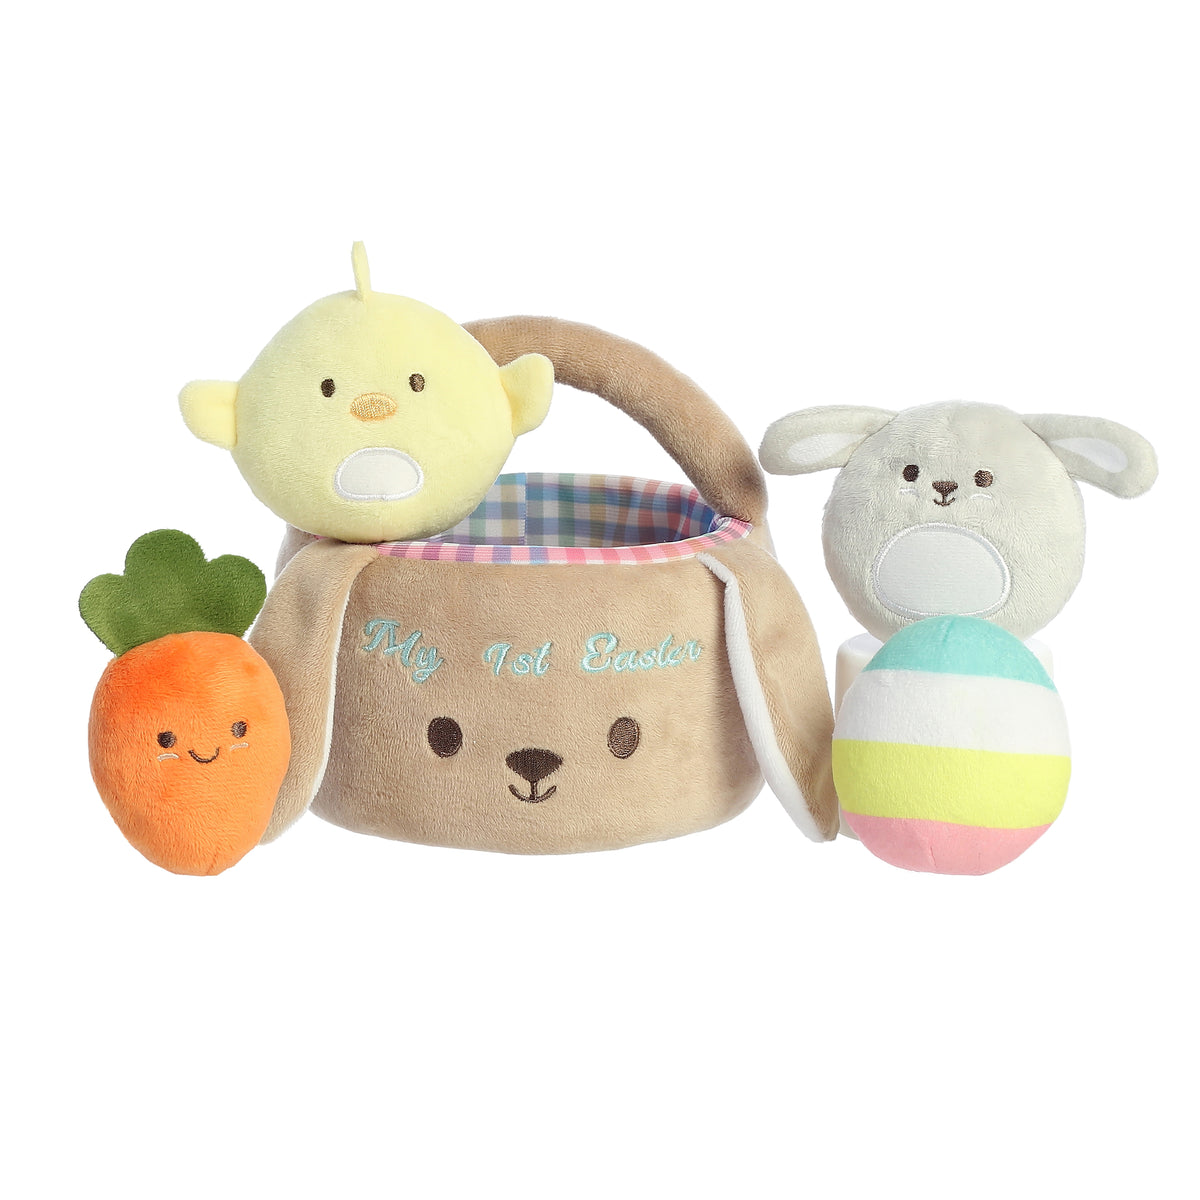 My 1st Easter Easter Basket from Aurora's Spring Collection, plush bear basket with toys, ideal for babies' first Easter.